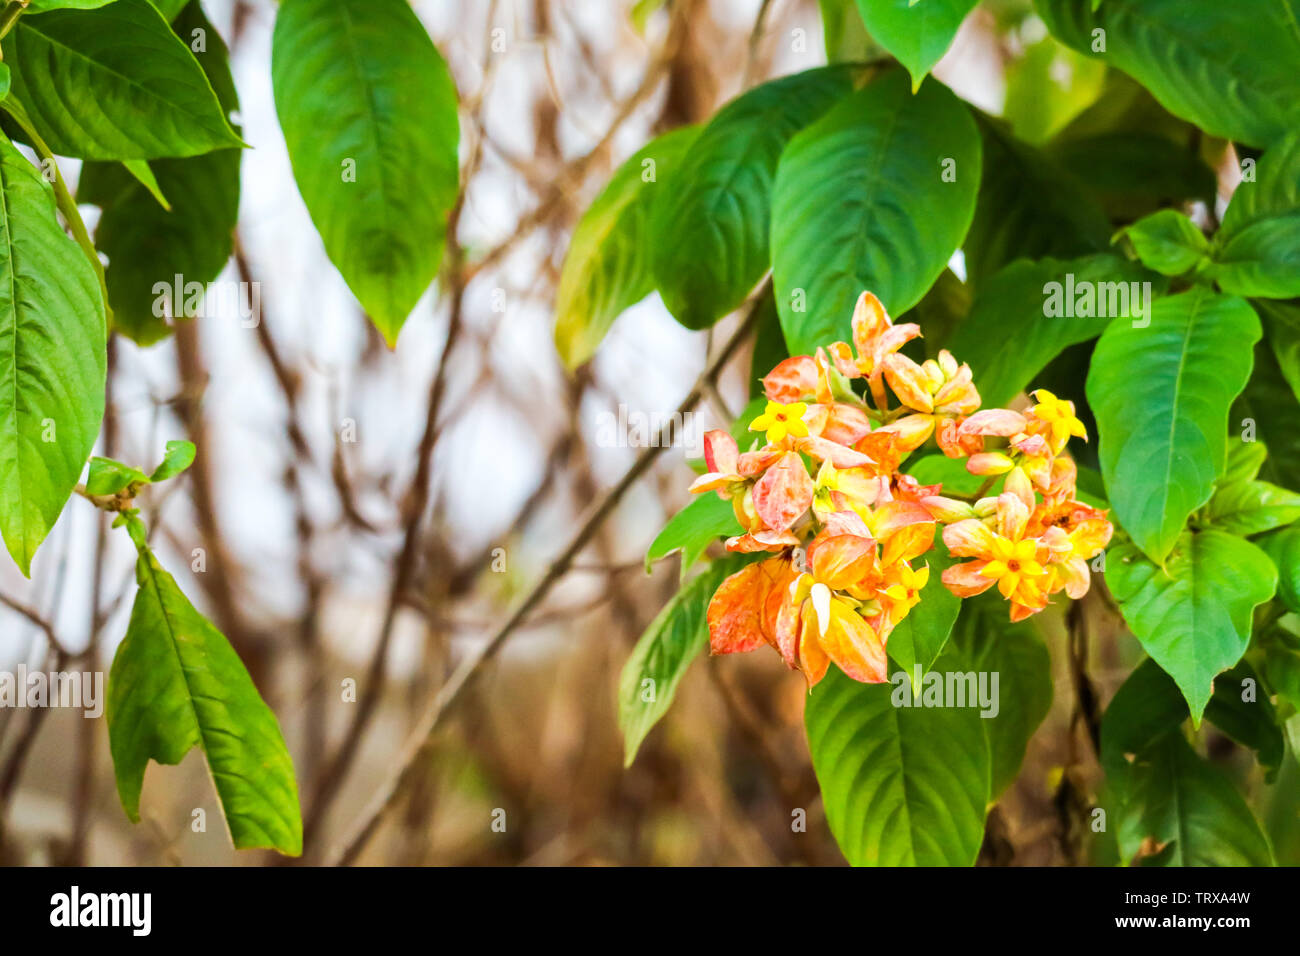 The calyx expanded into five lobe of orange pink yellow and with soft short hairs according to the branches The bottom leaves, flower petals Stock Photo